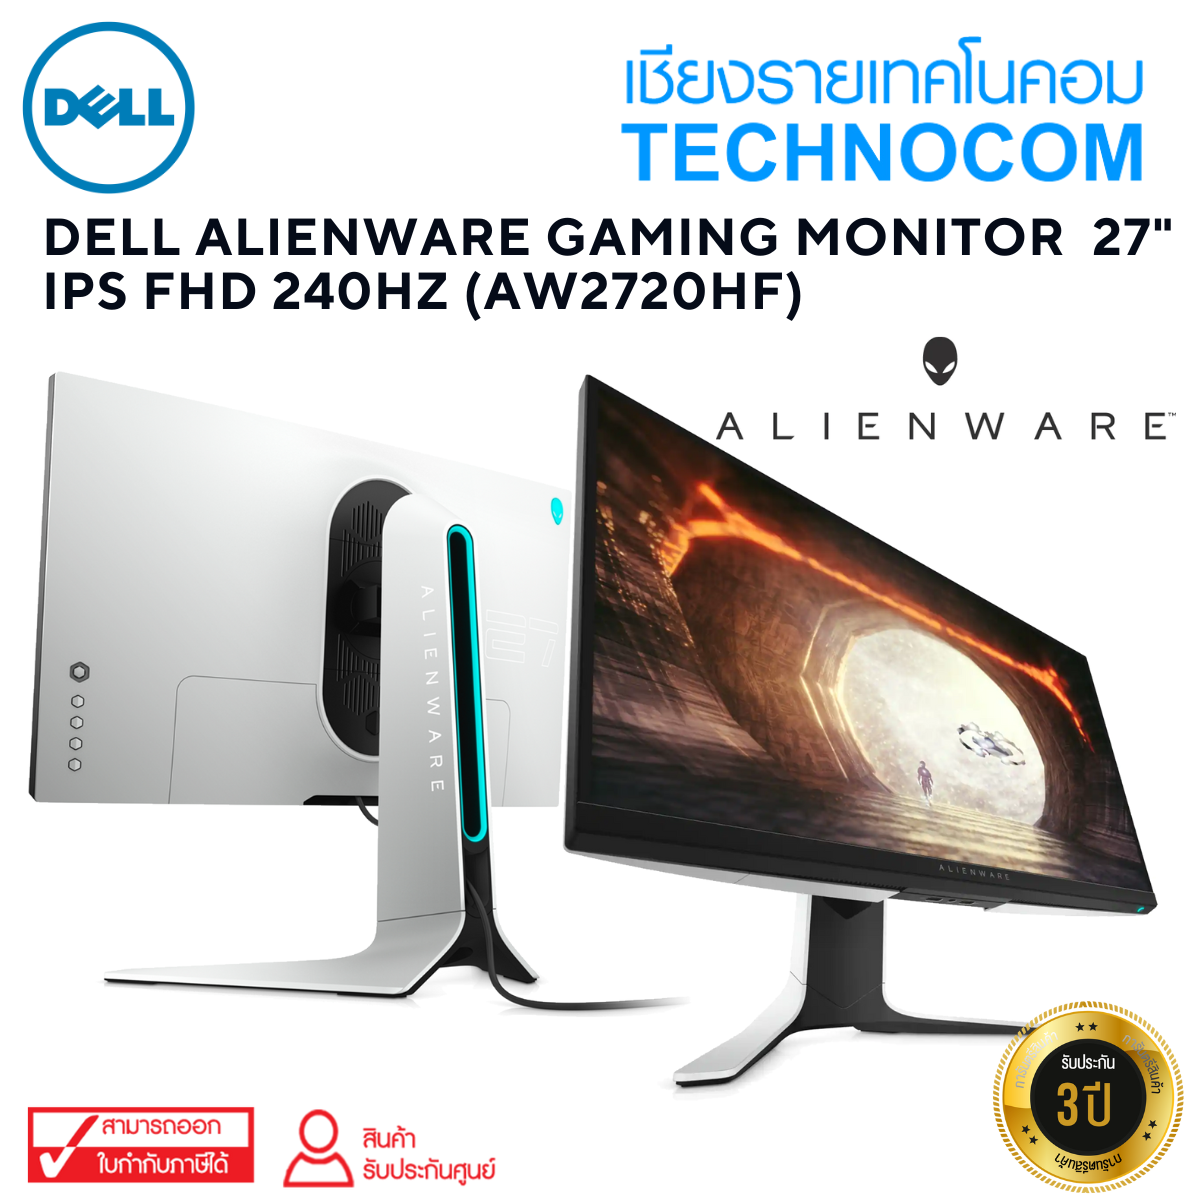 DELL ALIENWARE GAMING MONITOR  27" IPS FHD 240Hz (AW2720HF)